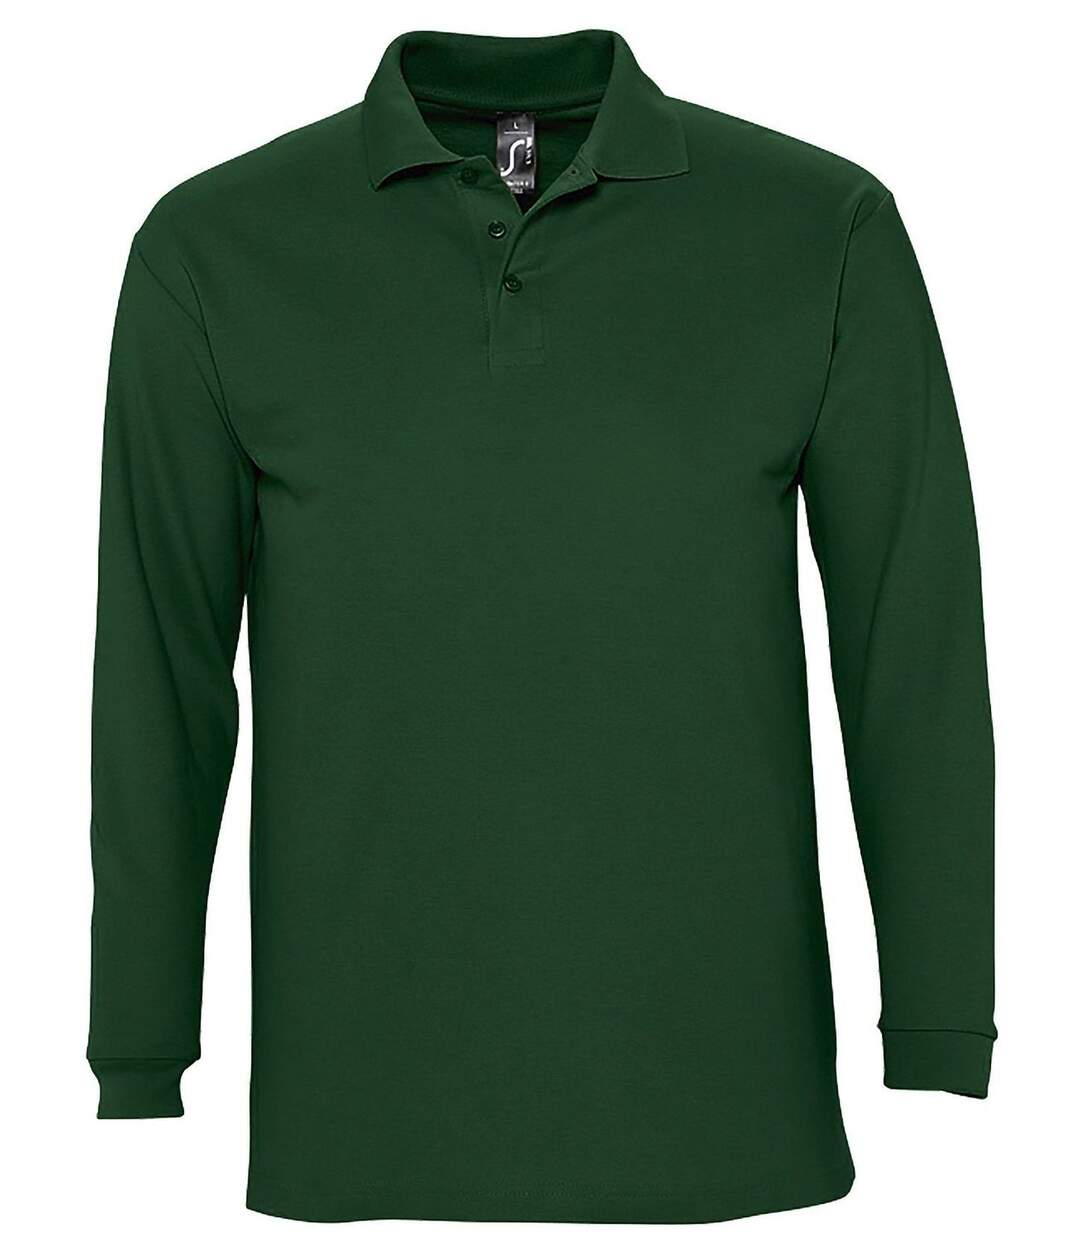 Polo manches longues - Homme - 11353 - vert golf